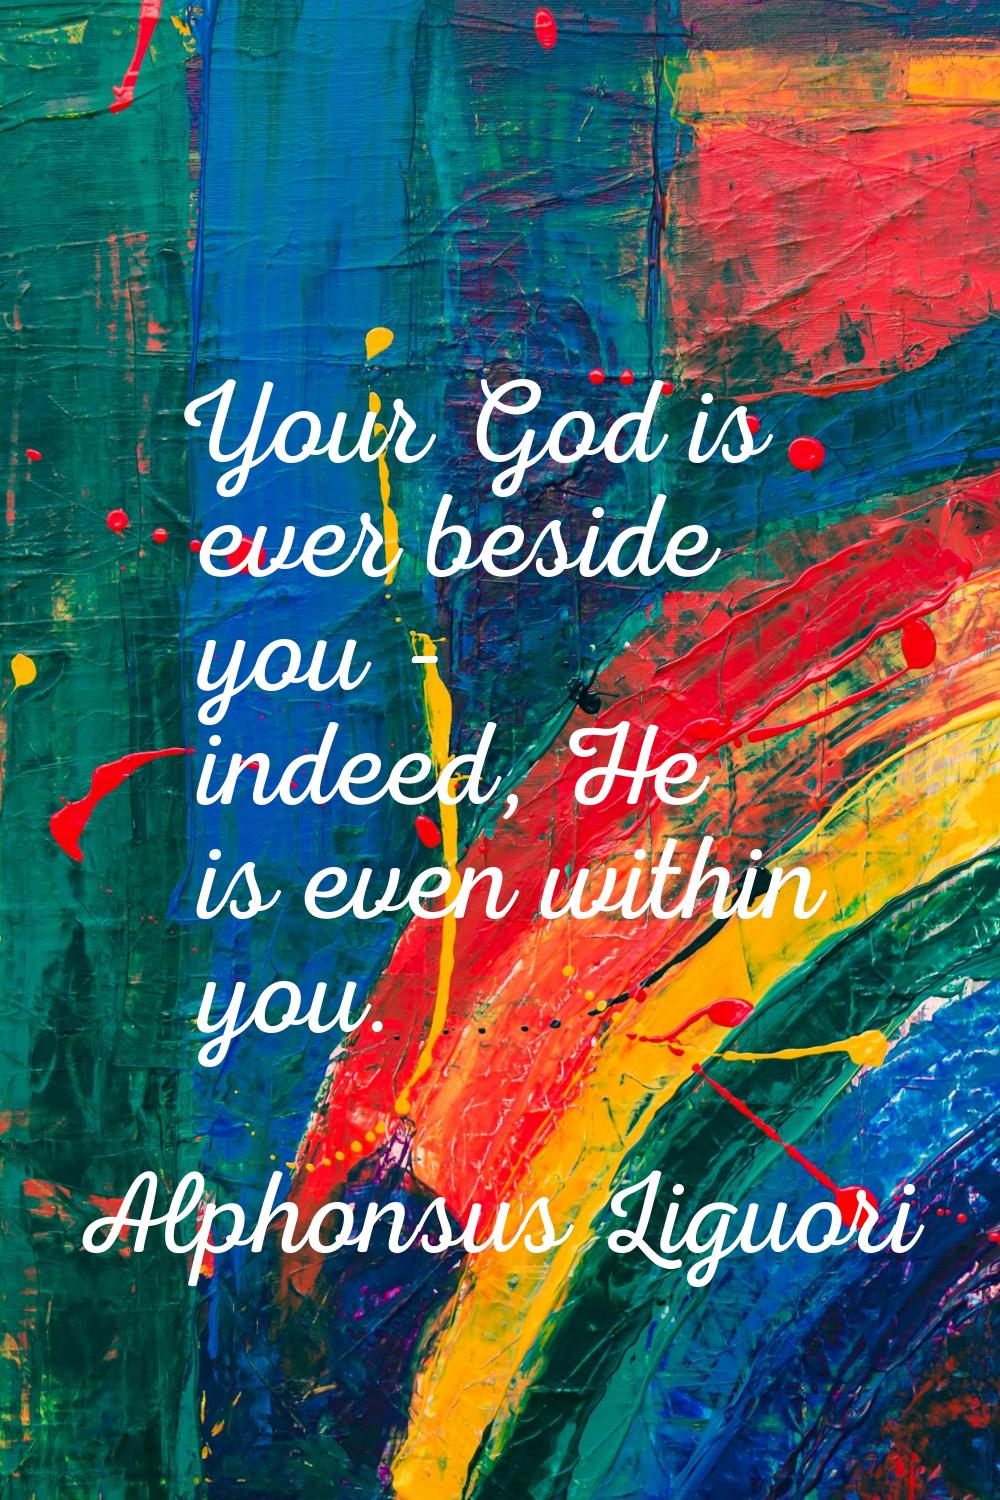 Your God is ever beside you - indeed, He is even within you.